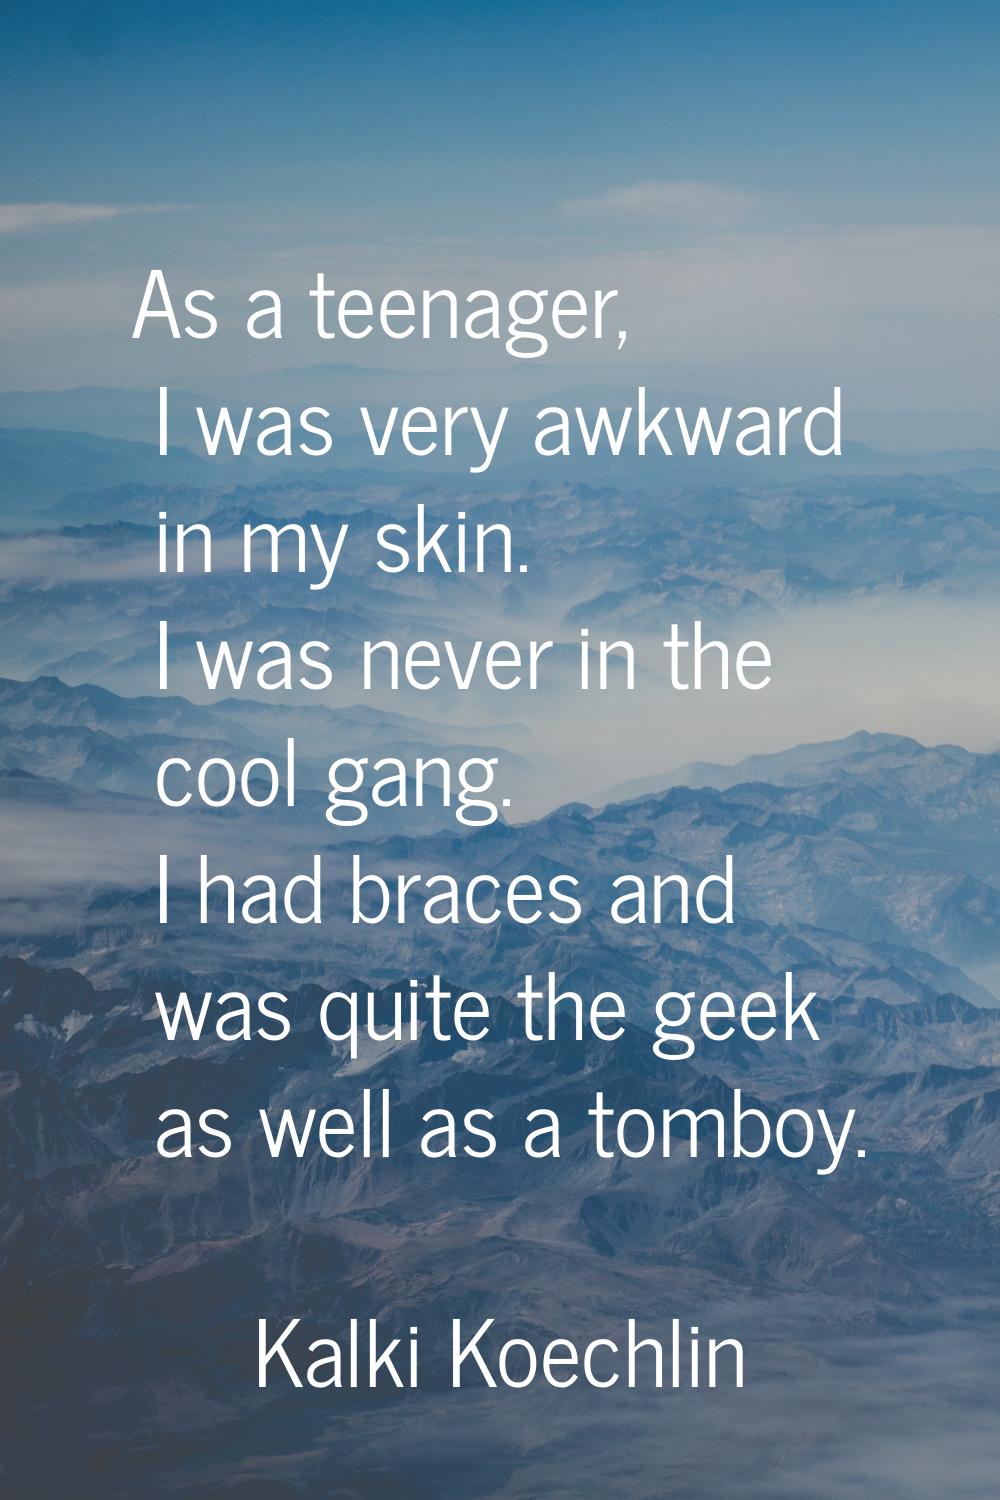 As a teenager, I was very awkward in my skin. I was never in the cool gang. I had braces and was qu